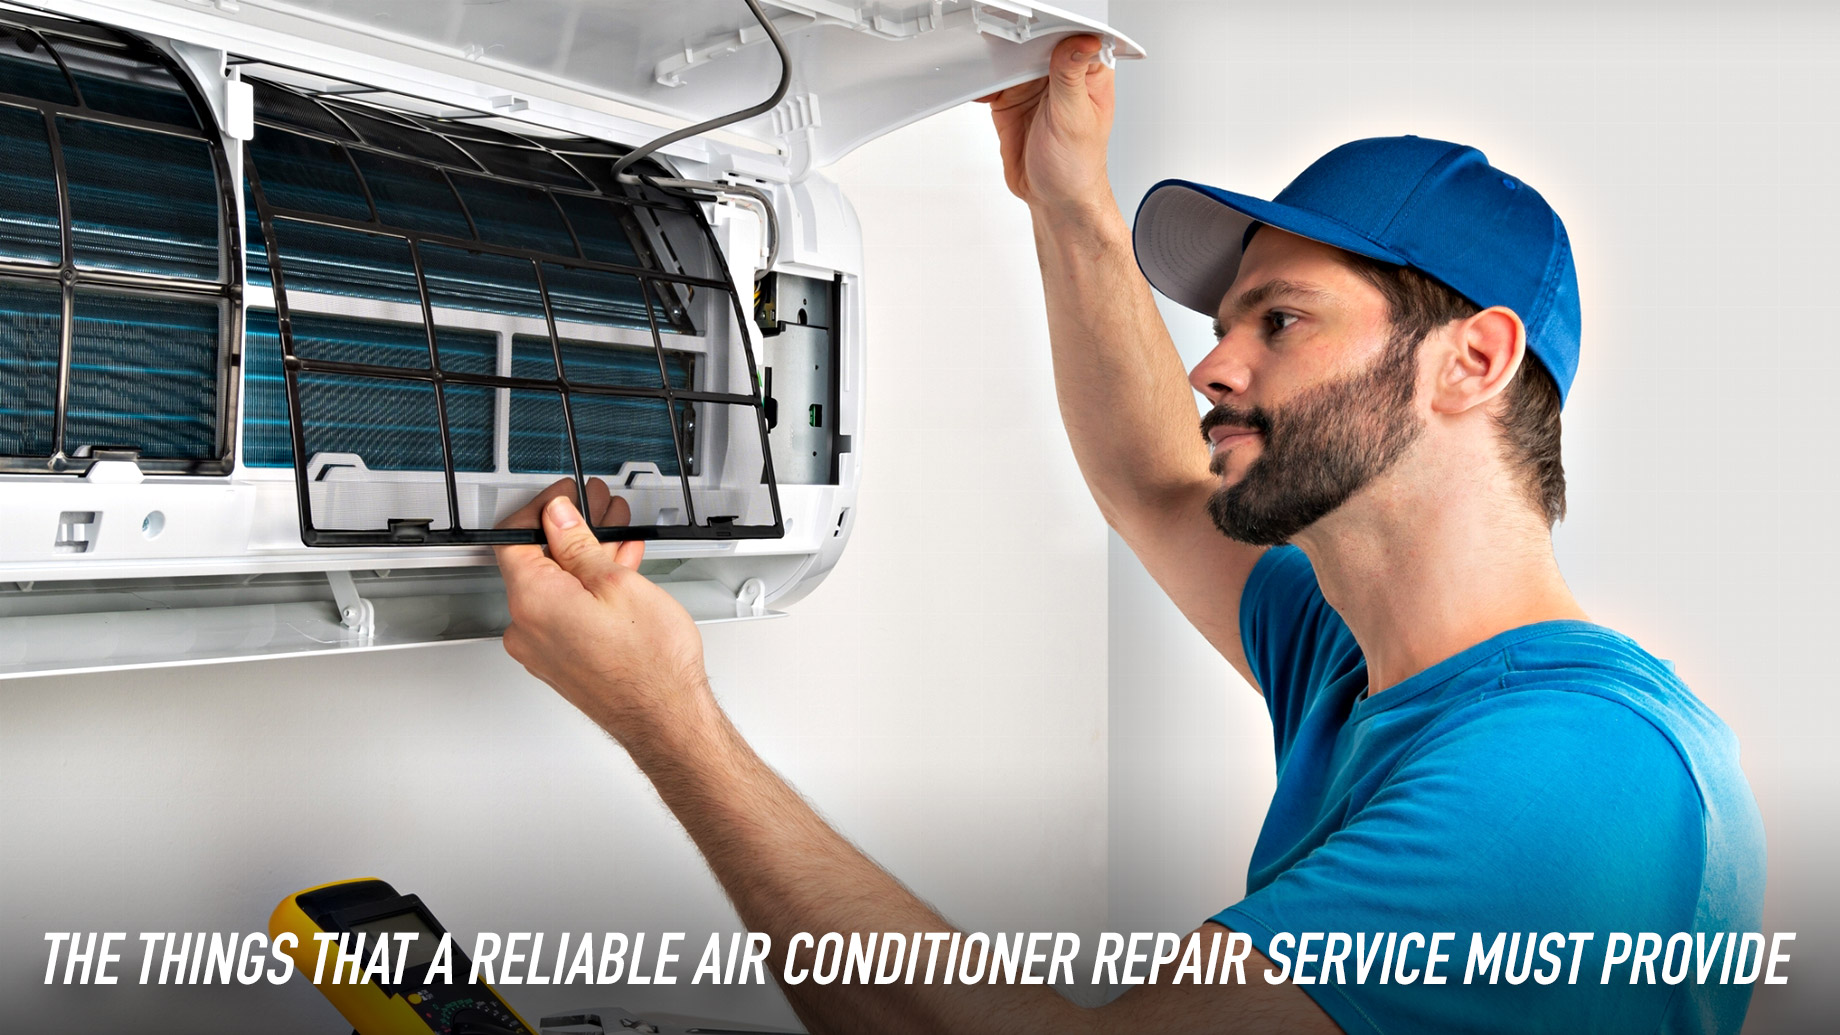 Affordable and Reliable Air Conditioning Services for Your Home